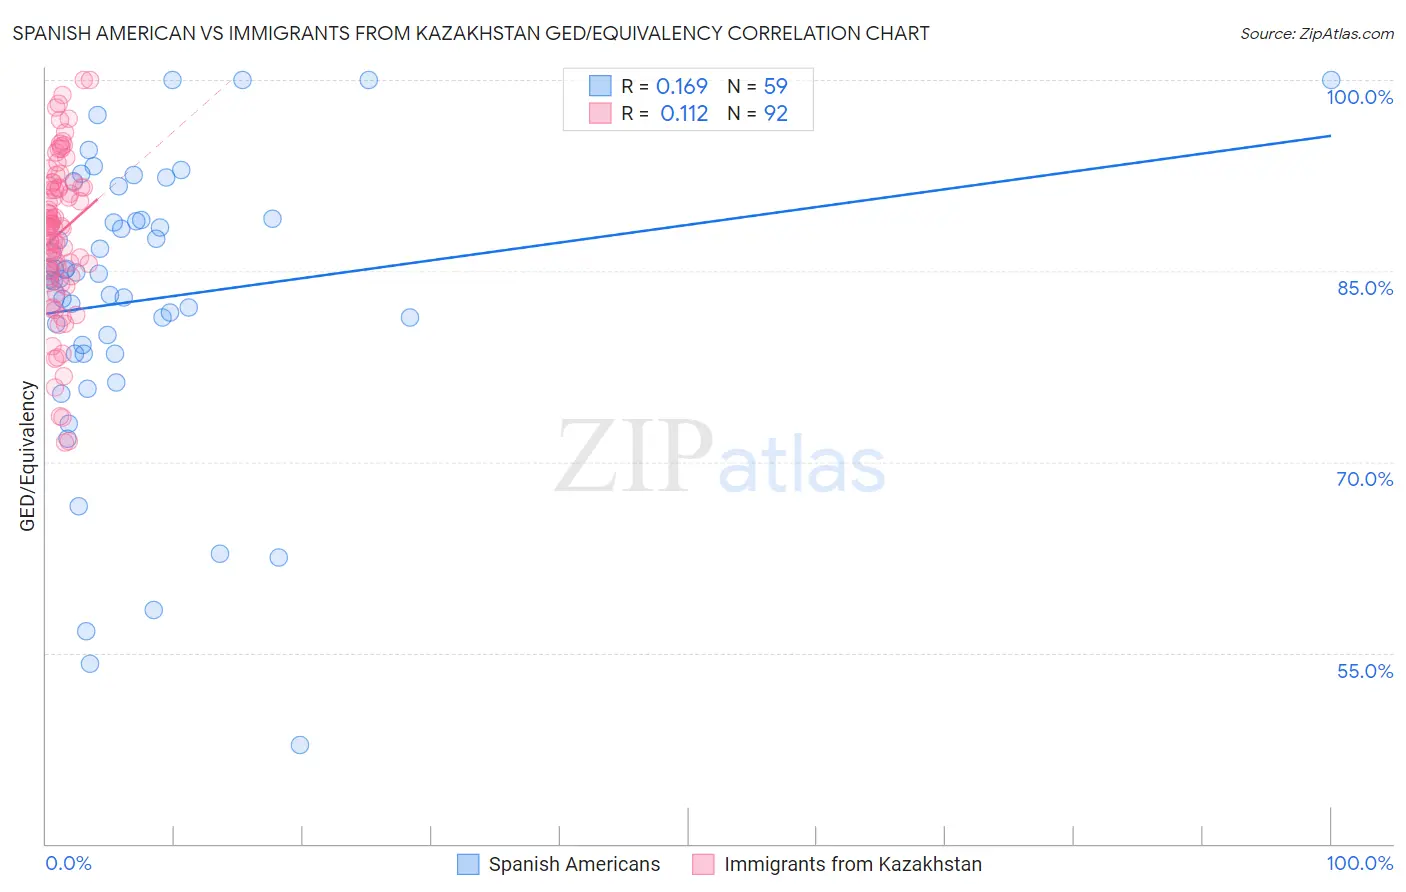 Spanish American vs Immigrants from Kazakhstan GED/Equivalency